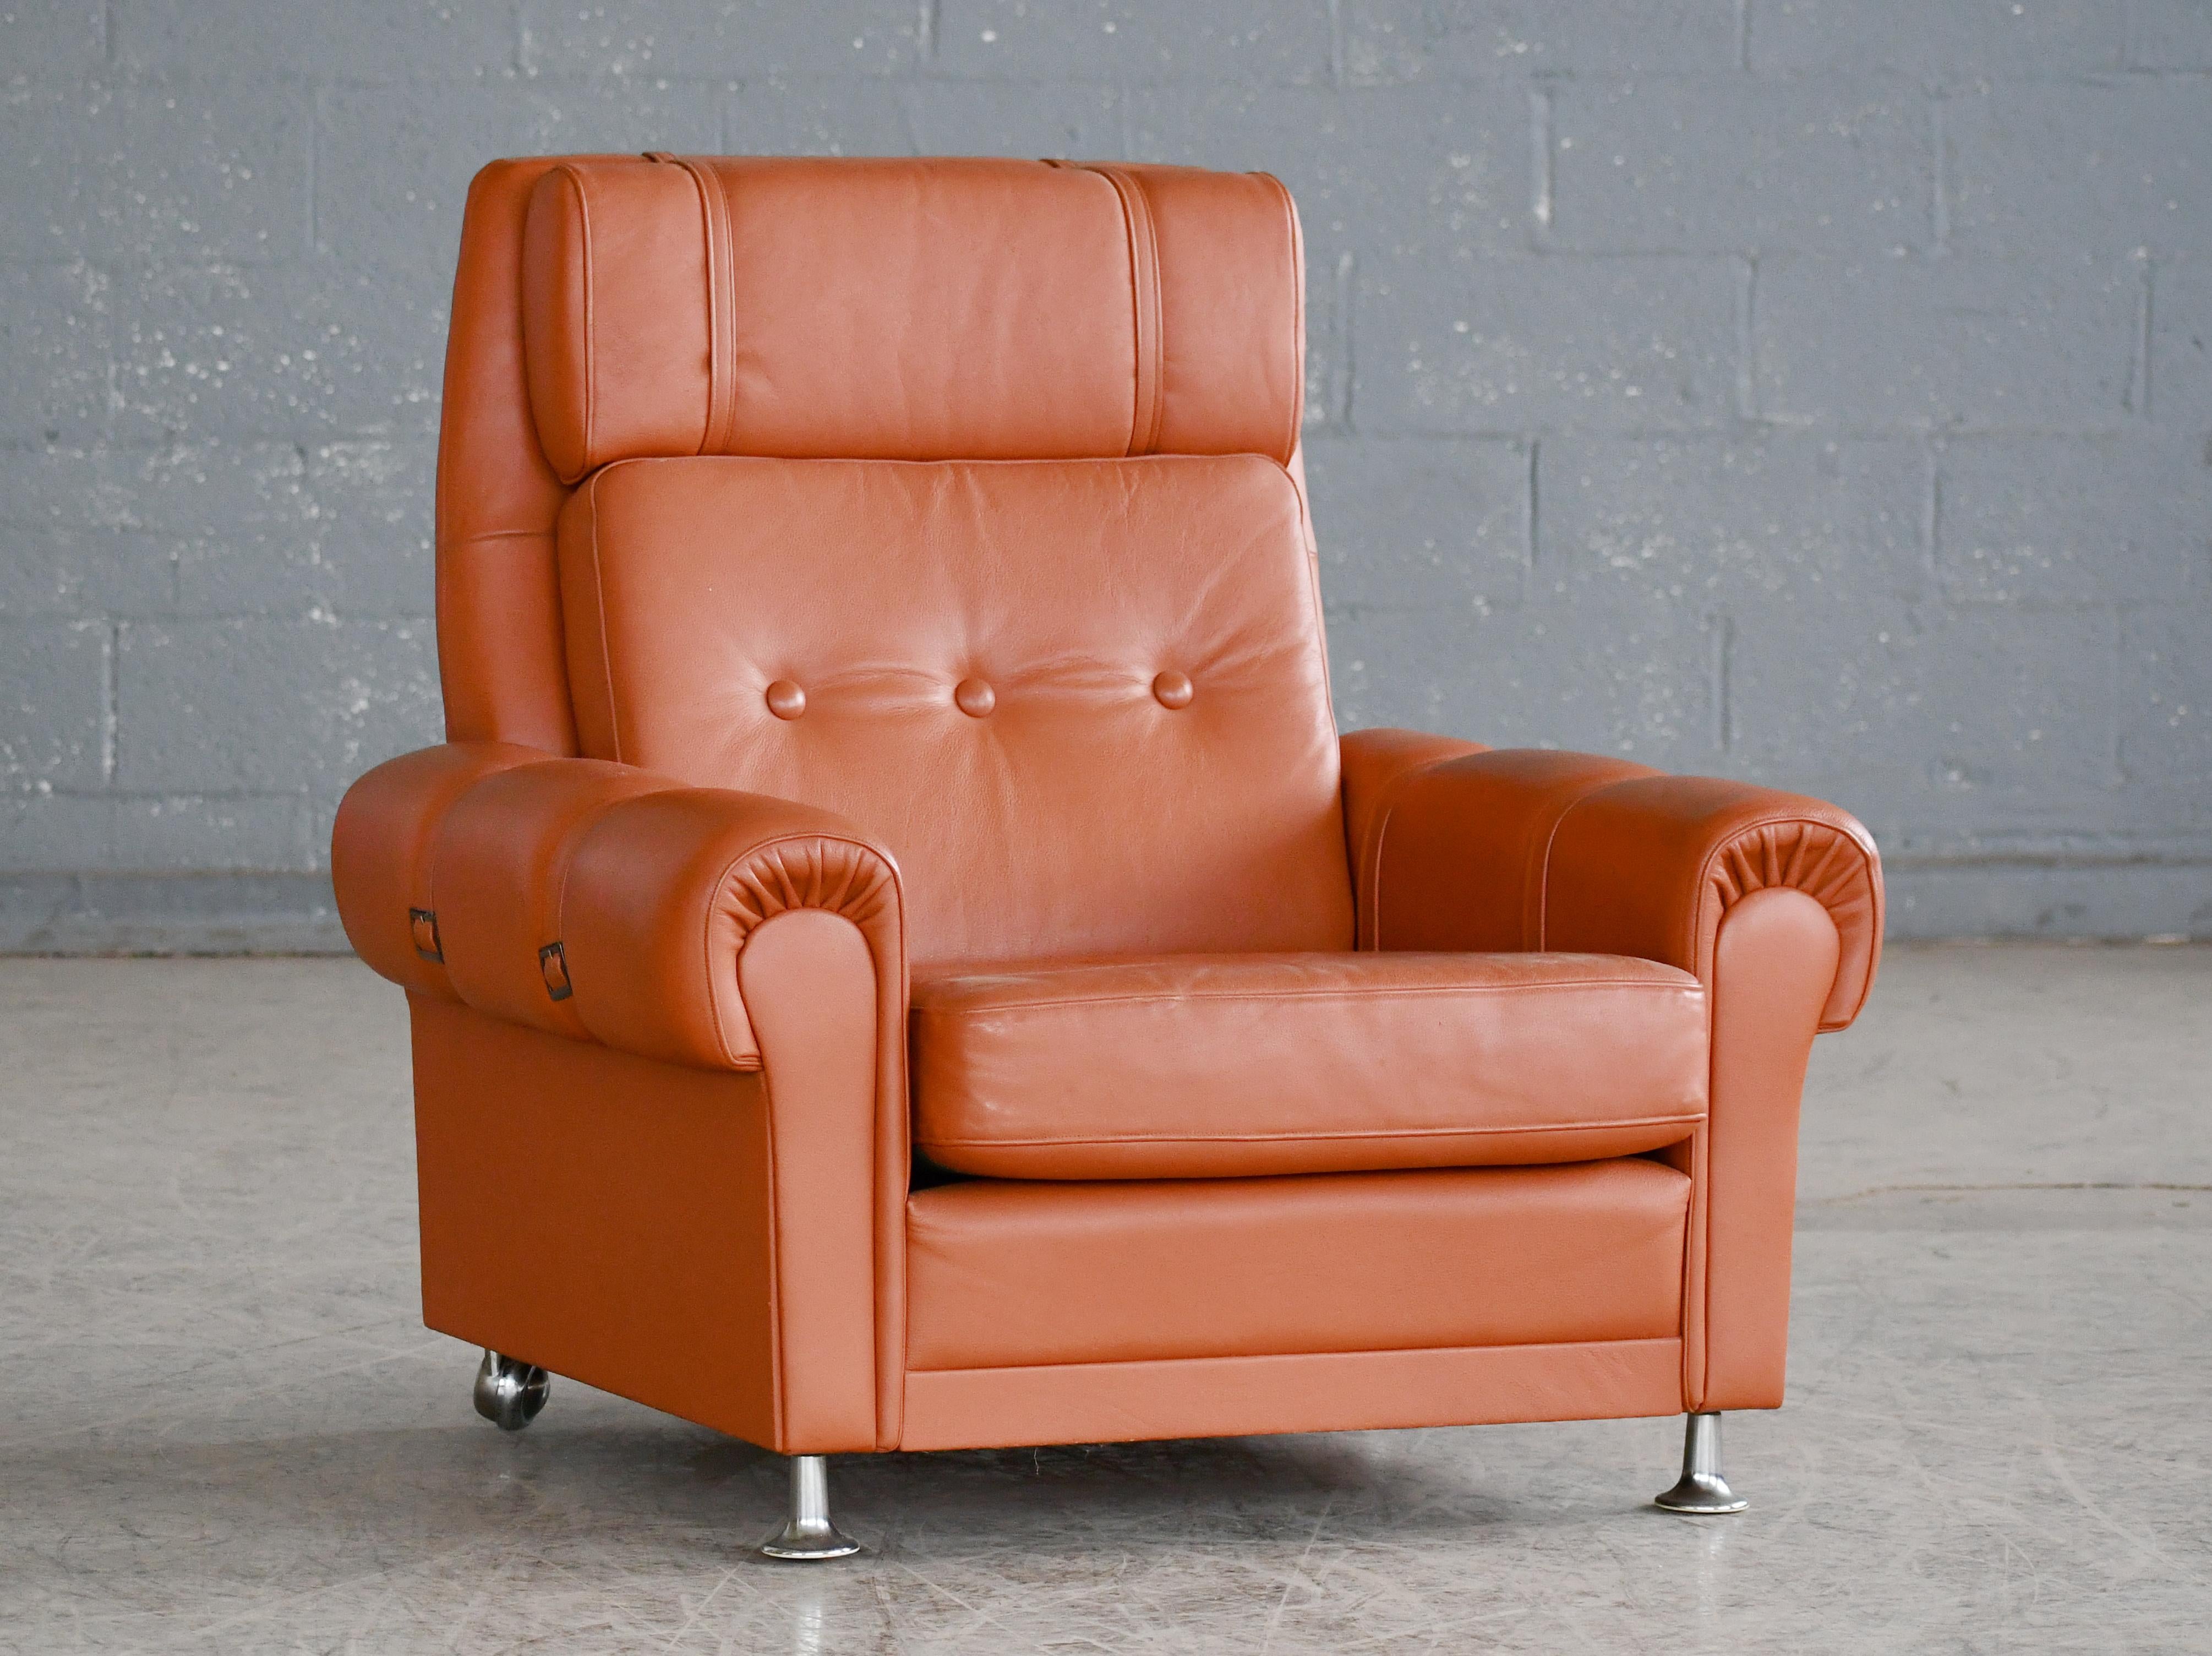 Mid-Century Modern Illum Wikkelsø Style Leather Lounge Chair with Ottoman Cognac Colored Leather  For Sale